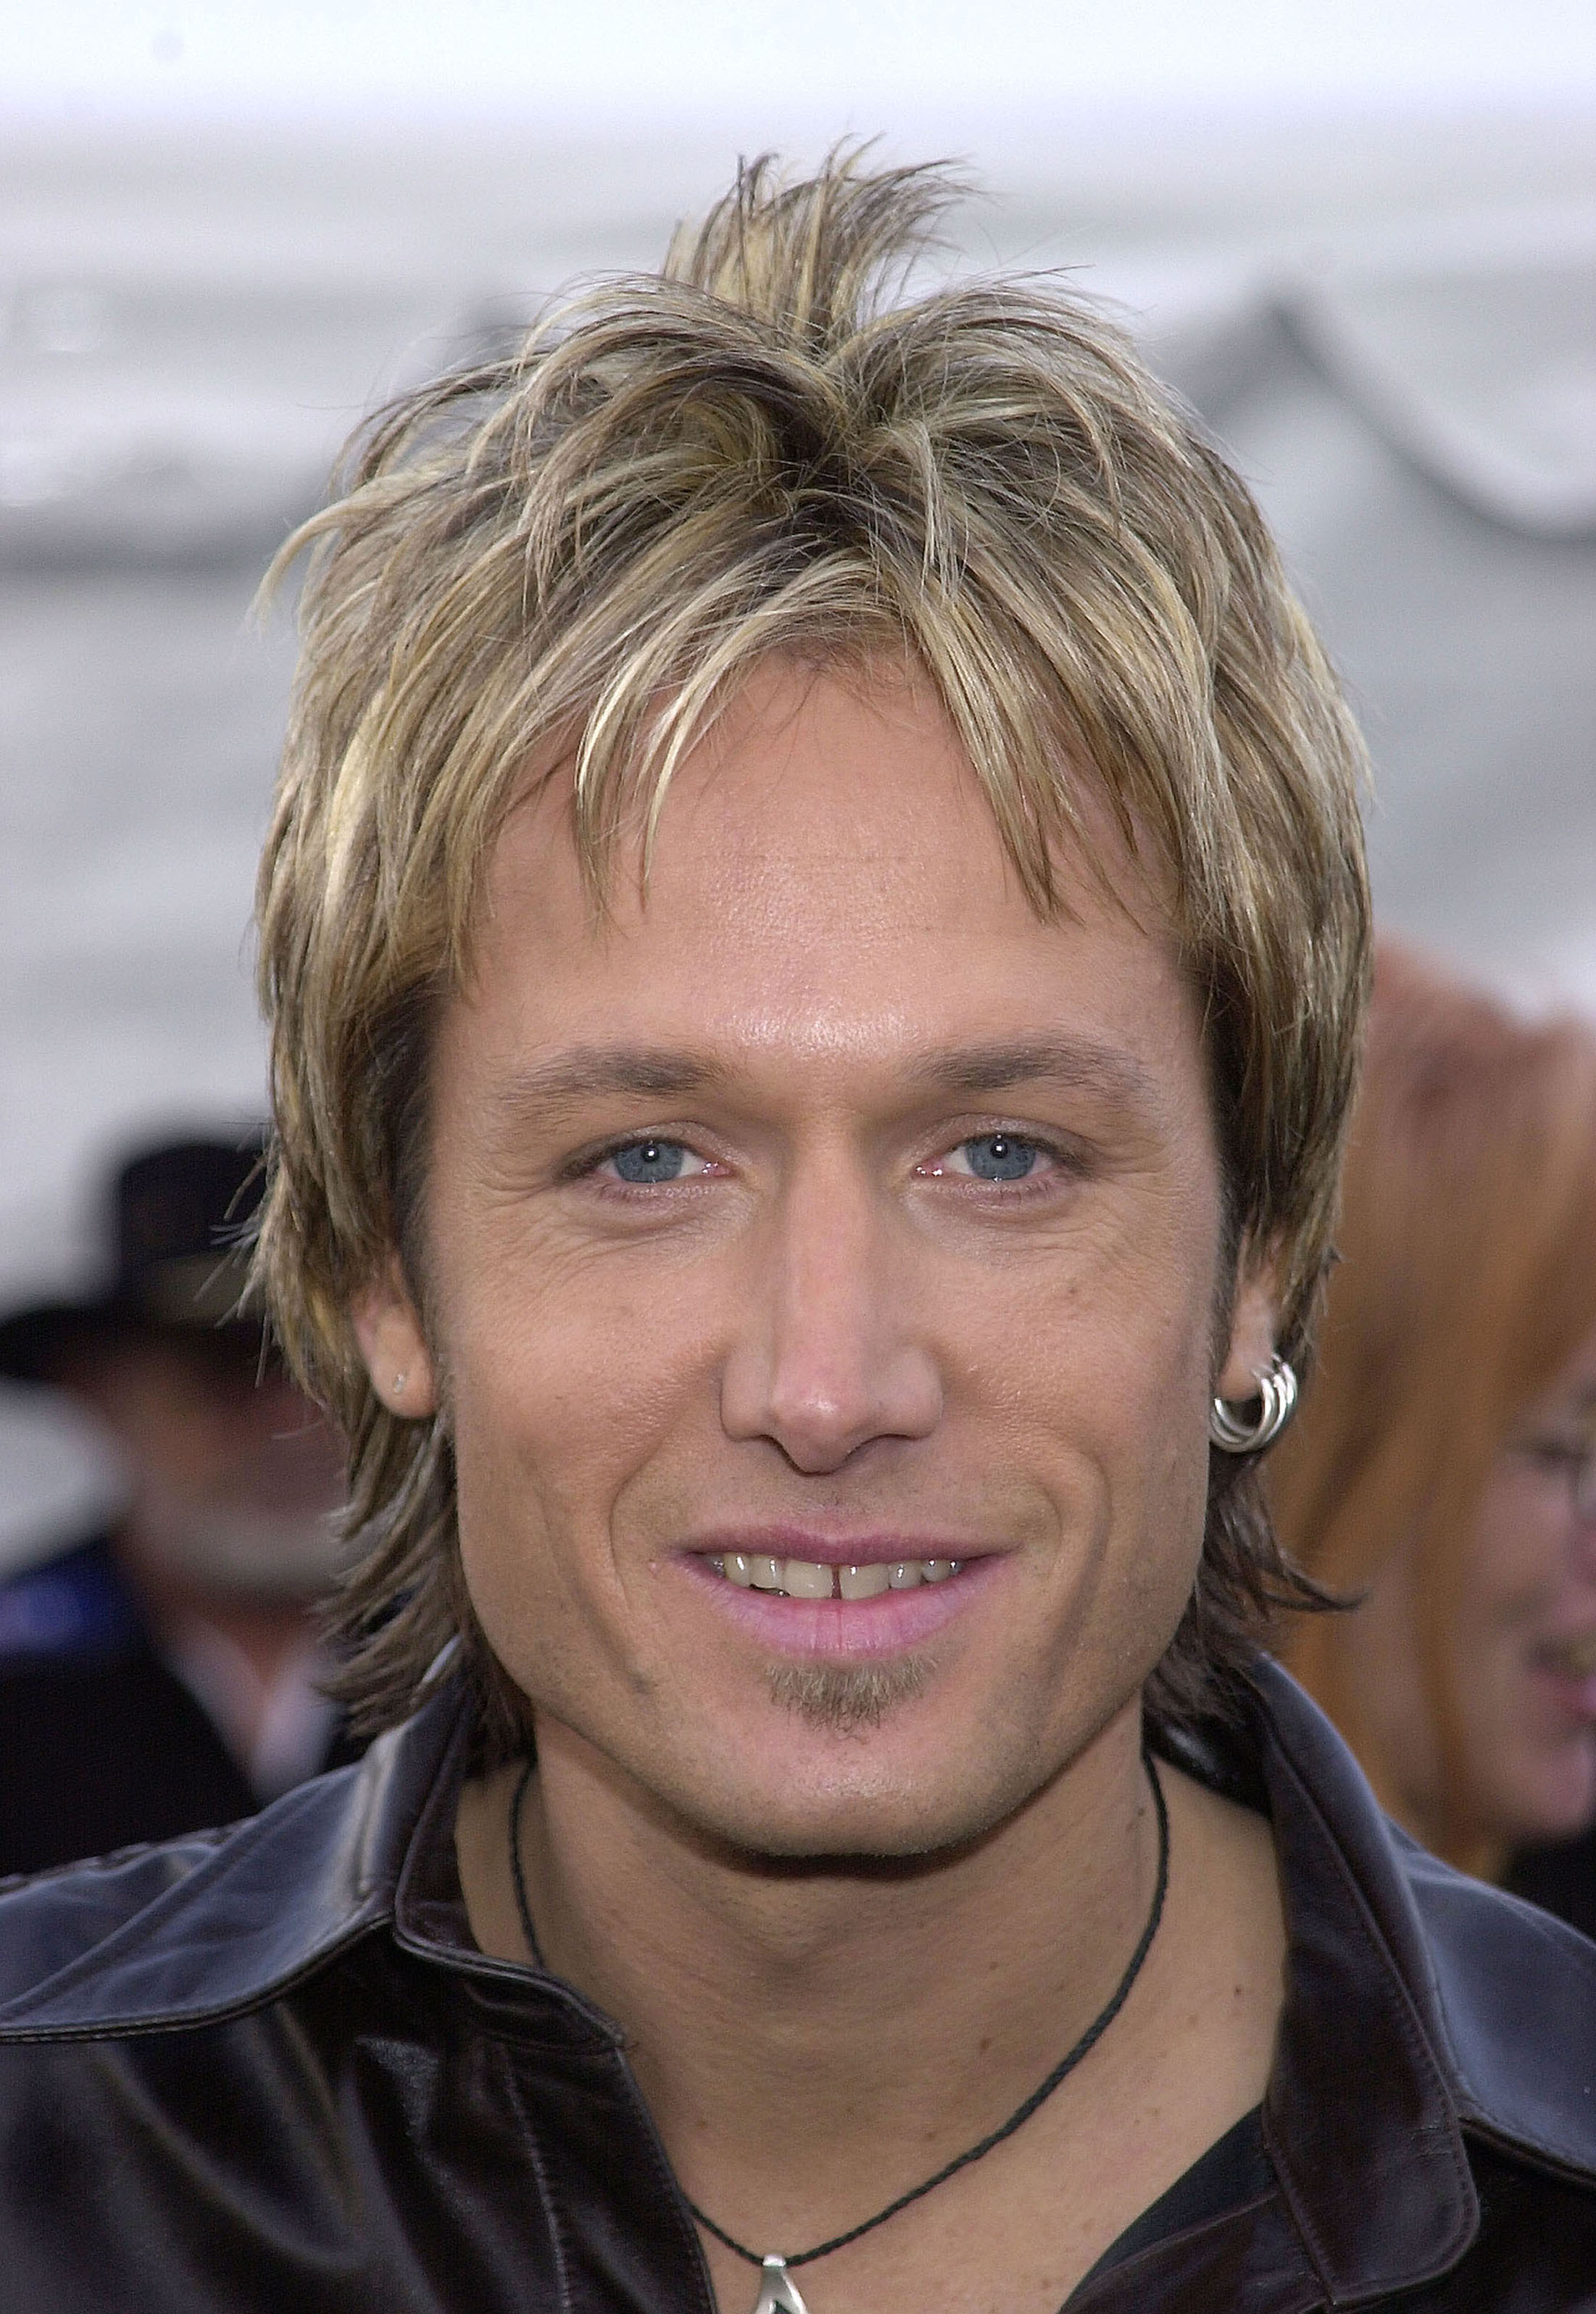 Keith Urban at The 28th Annual American Music Awards on January 8, 2001, in Los Angeles, California. | Source: Getty Images